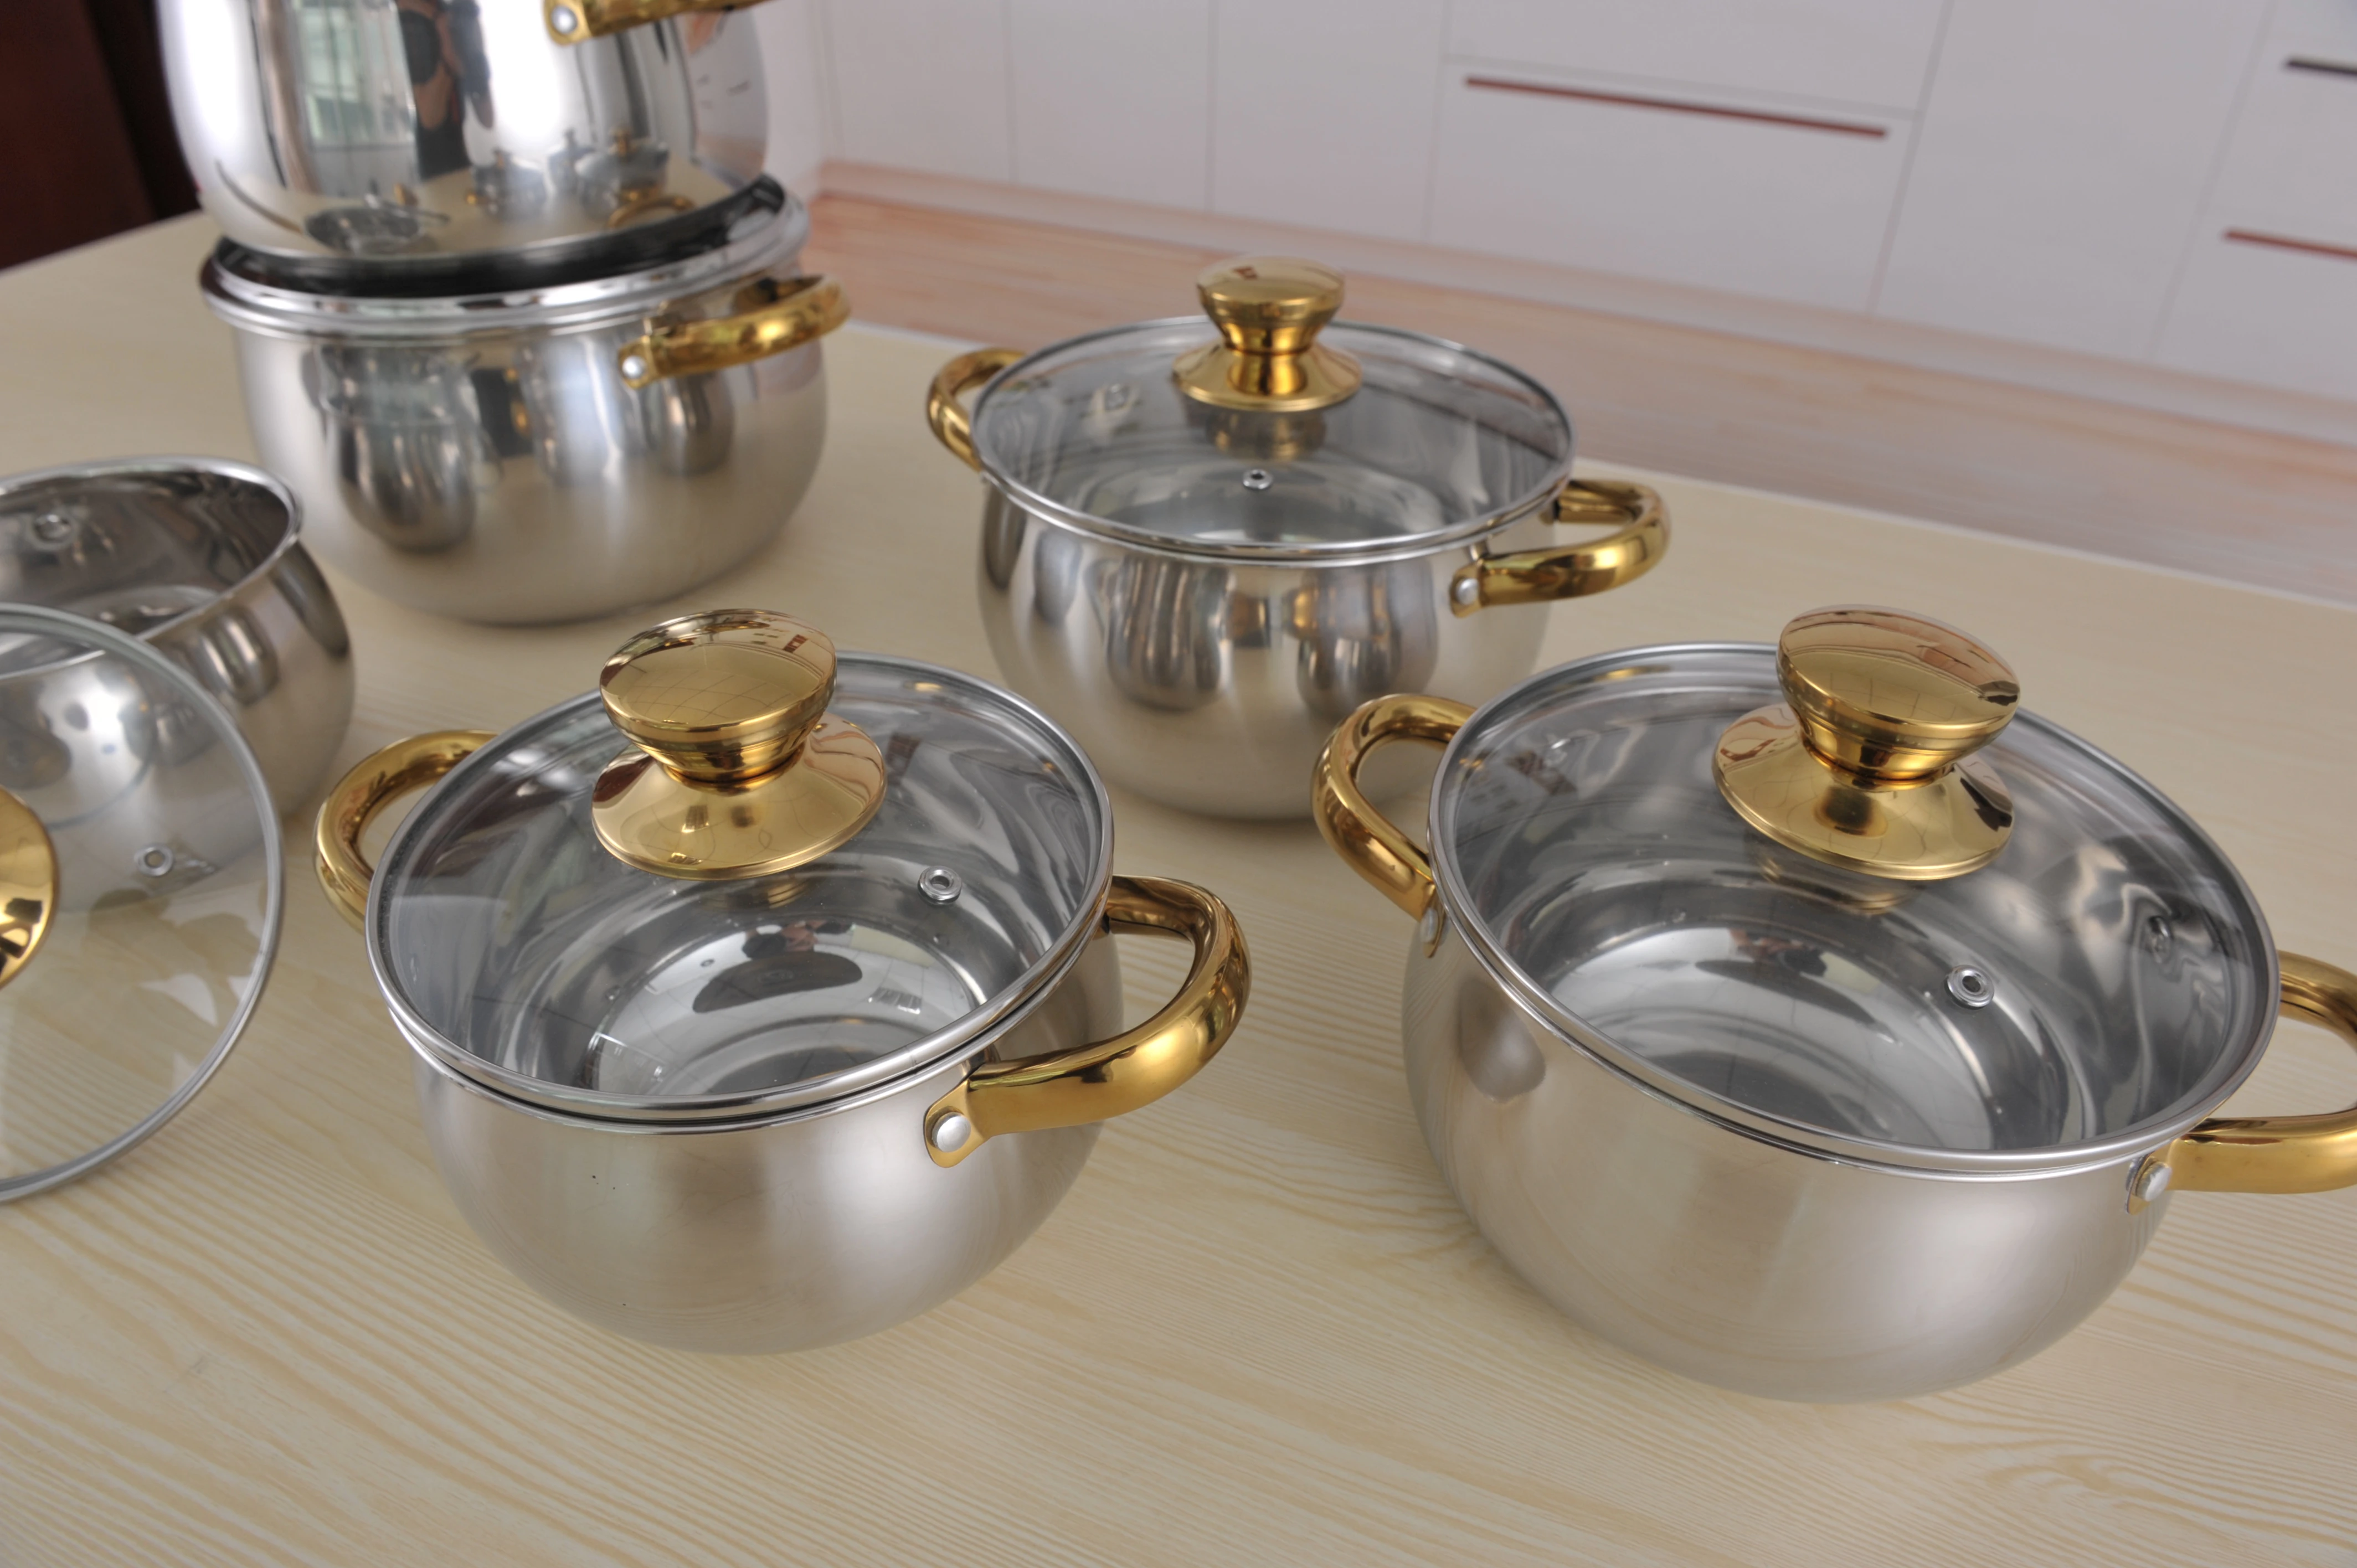 https://img2.tradewheel.com/uploads/images/products/7/0/newest-12pcs-stainless-steel-thomas-inox-cookware-set-inox-cooking-pot-with-gold-handle-cookware-sets1-0382852001626049529.jpg.webp